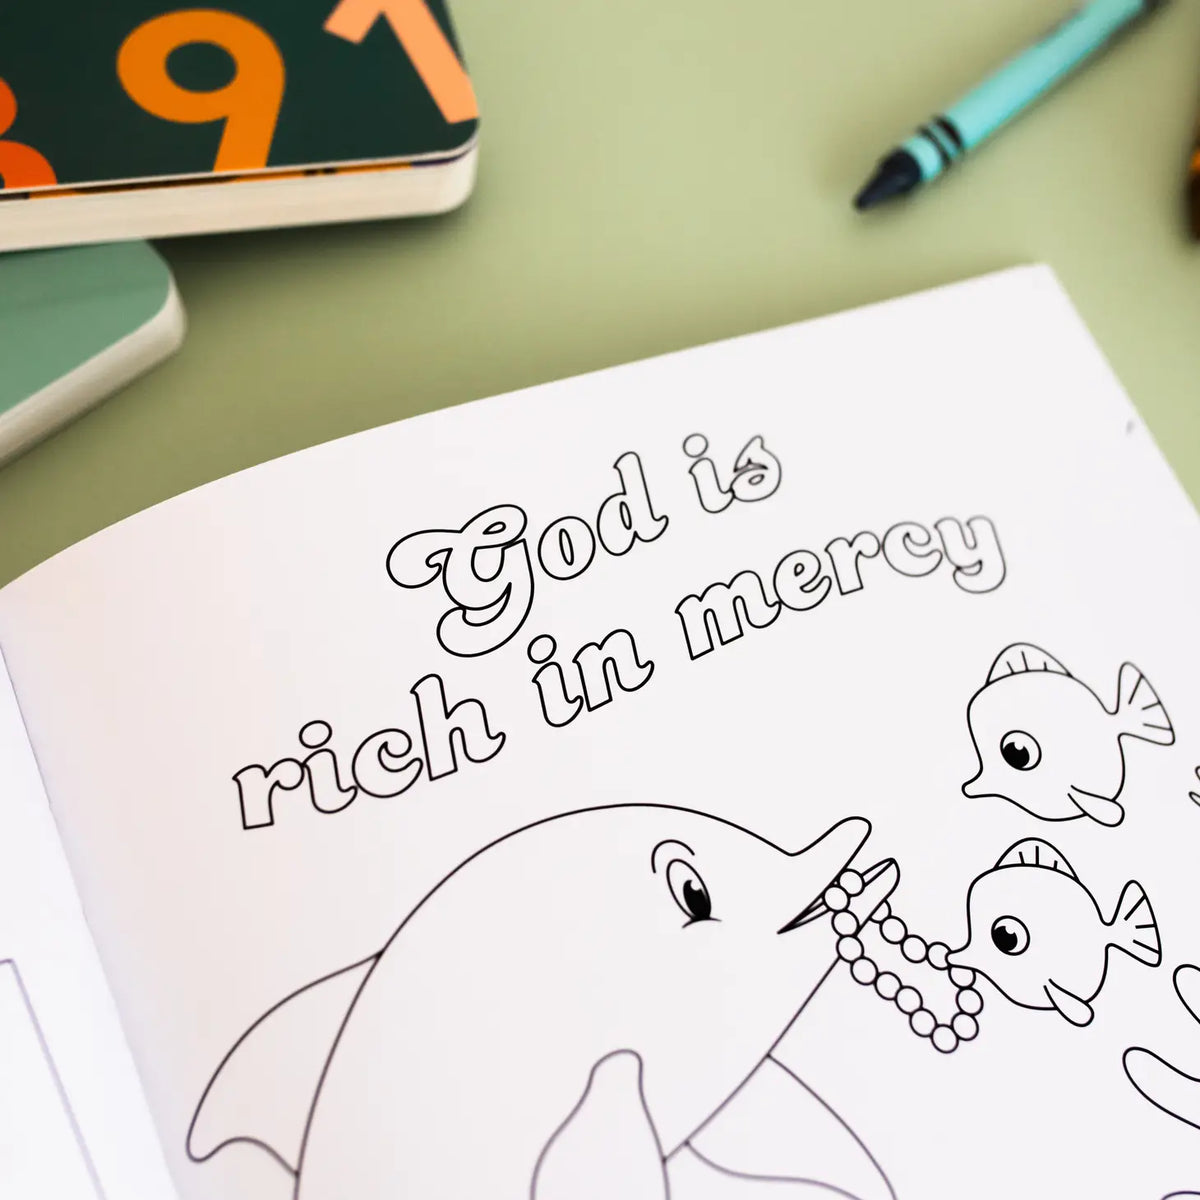 Our Great God - Kids Coloring Book